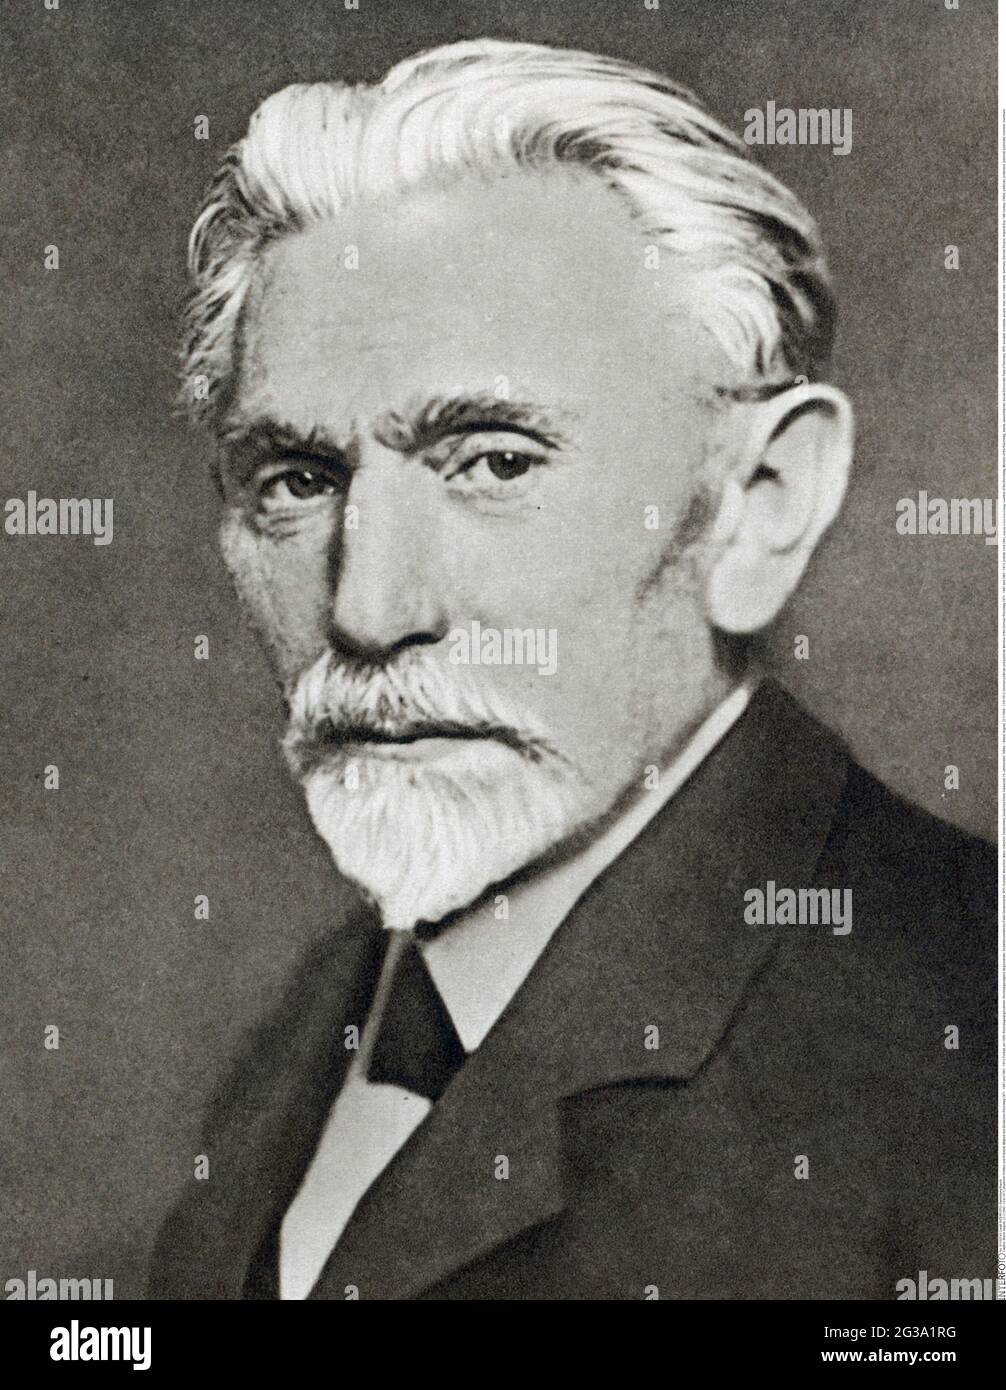 Bebel, August, 22.2.1840 - 13.8.1913, German politician and publicist, ADDITIONAL-RIGHTS-CLEARANCE-INFO-NOT-AVAILABLE Stock Photo